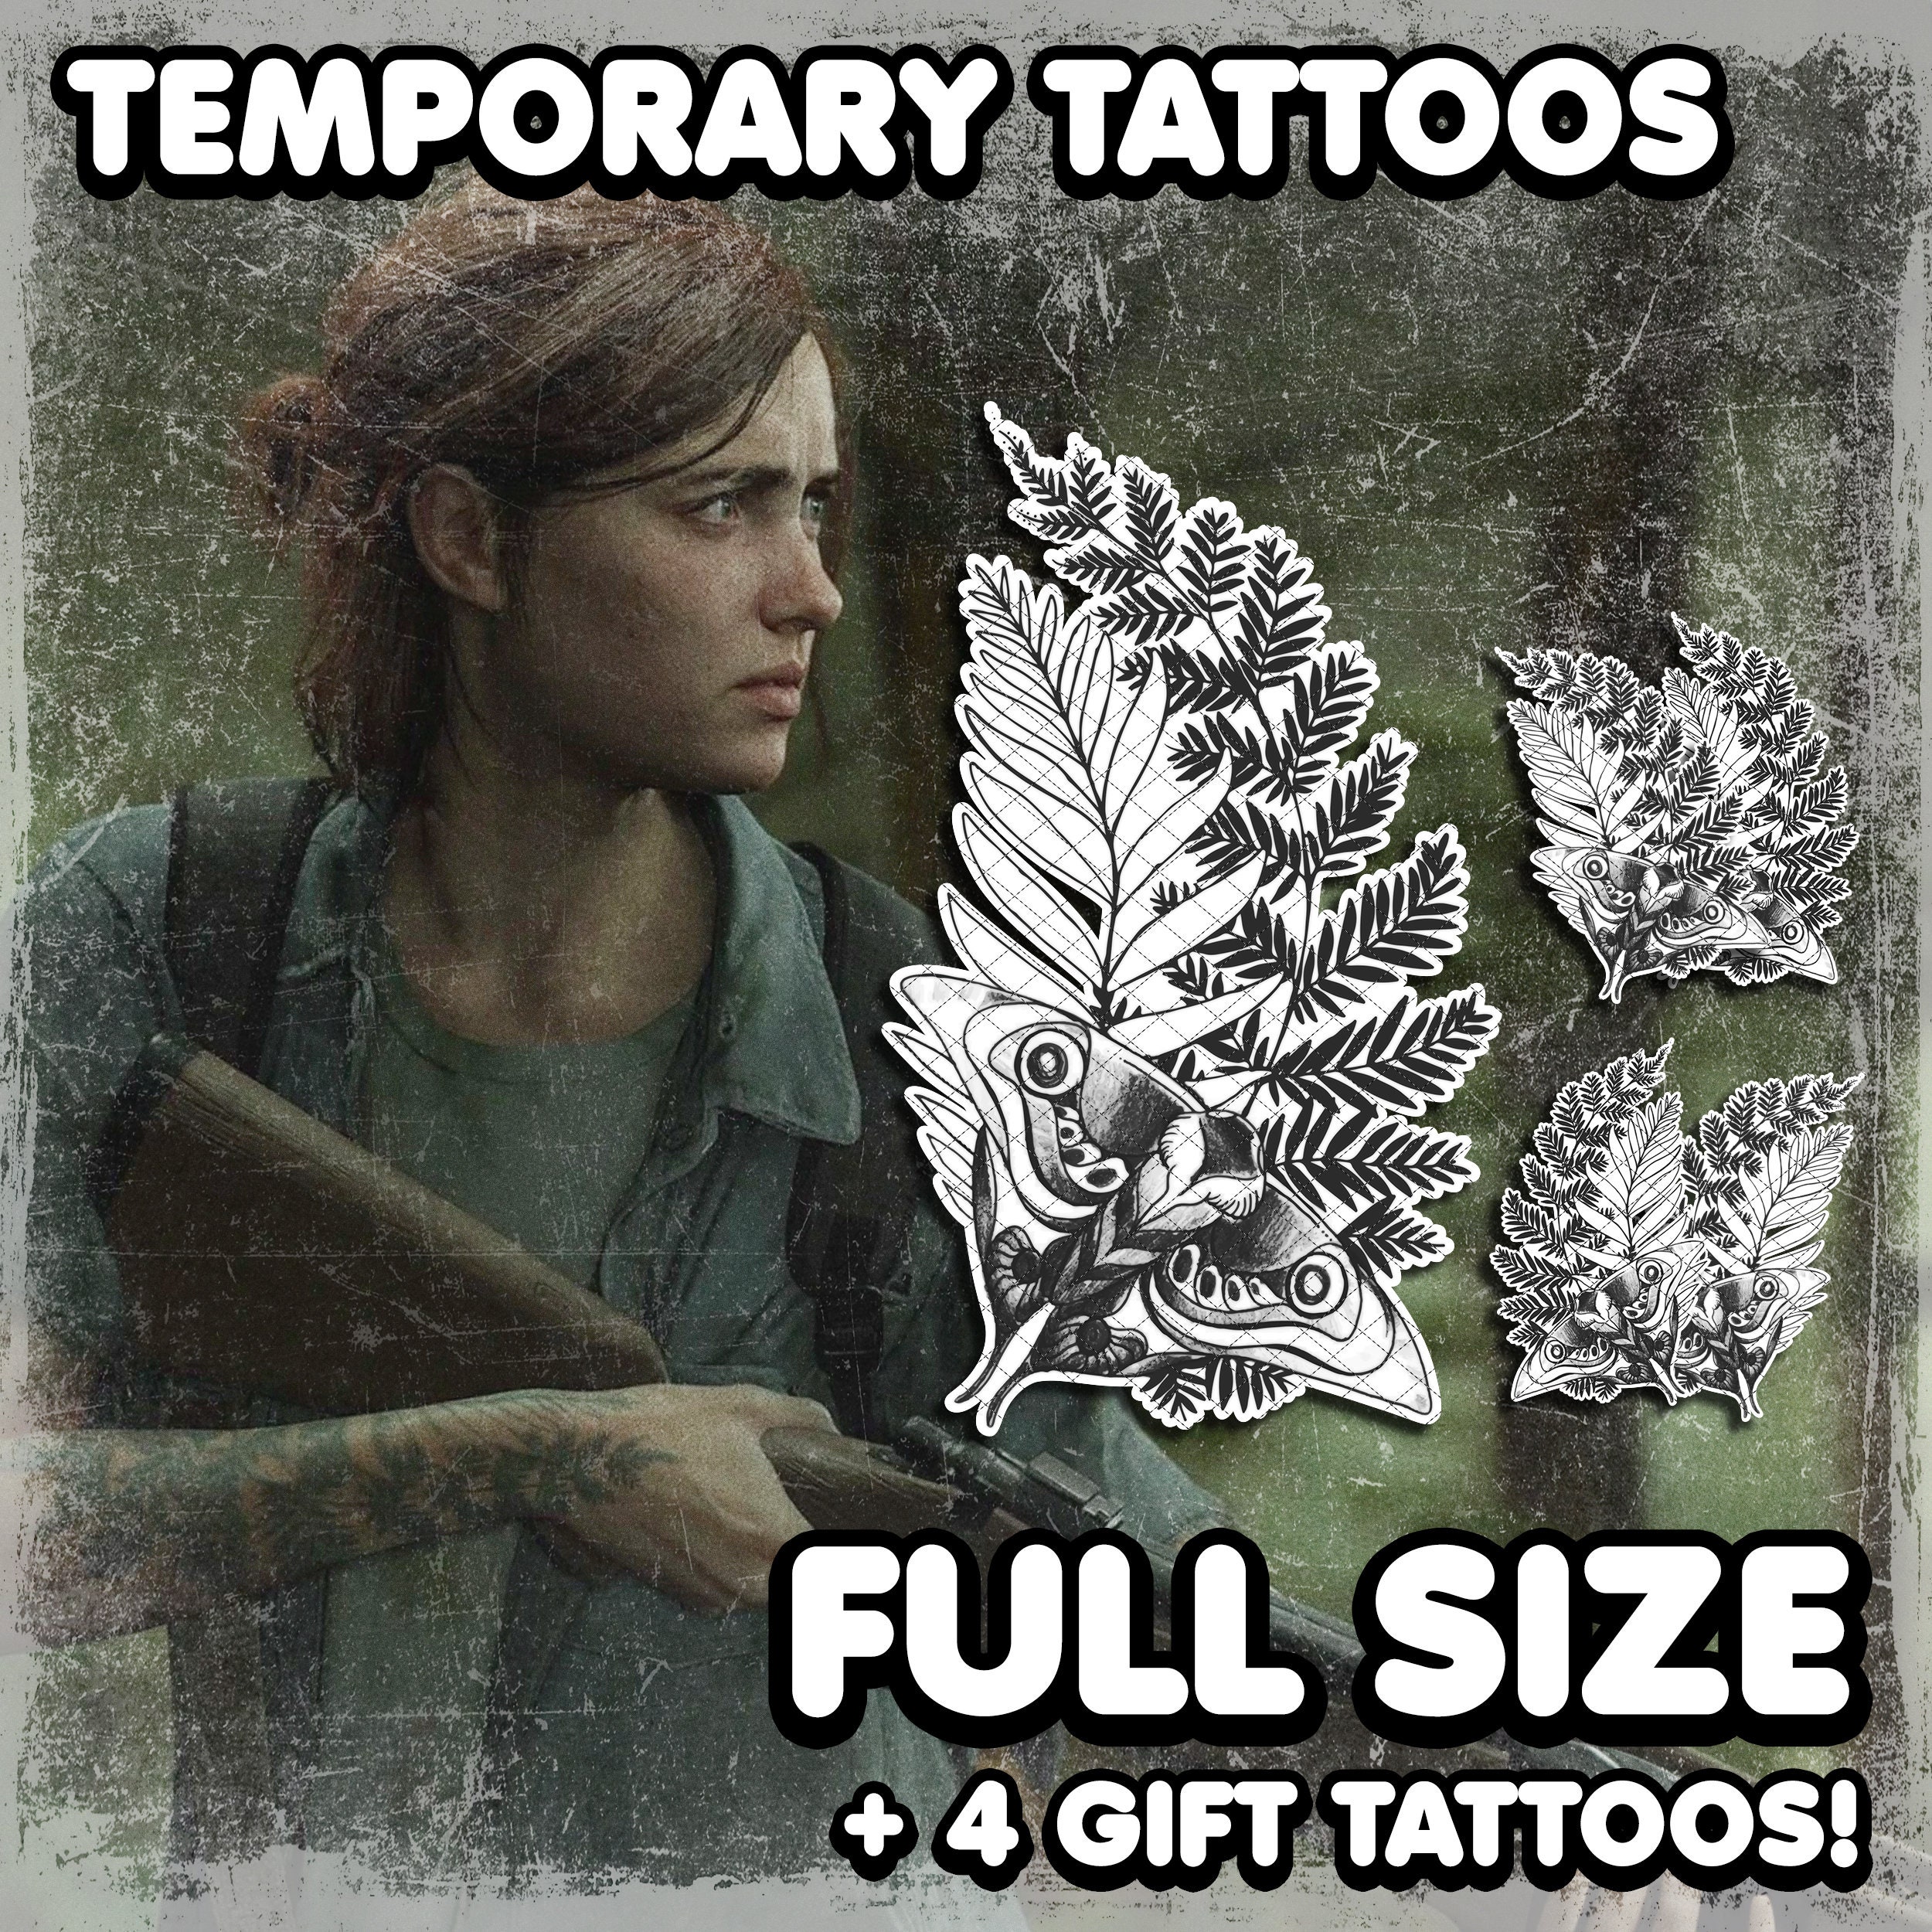 The Last of Us sticker, metallic gold. Ellie's tattoo from TLOU2